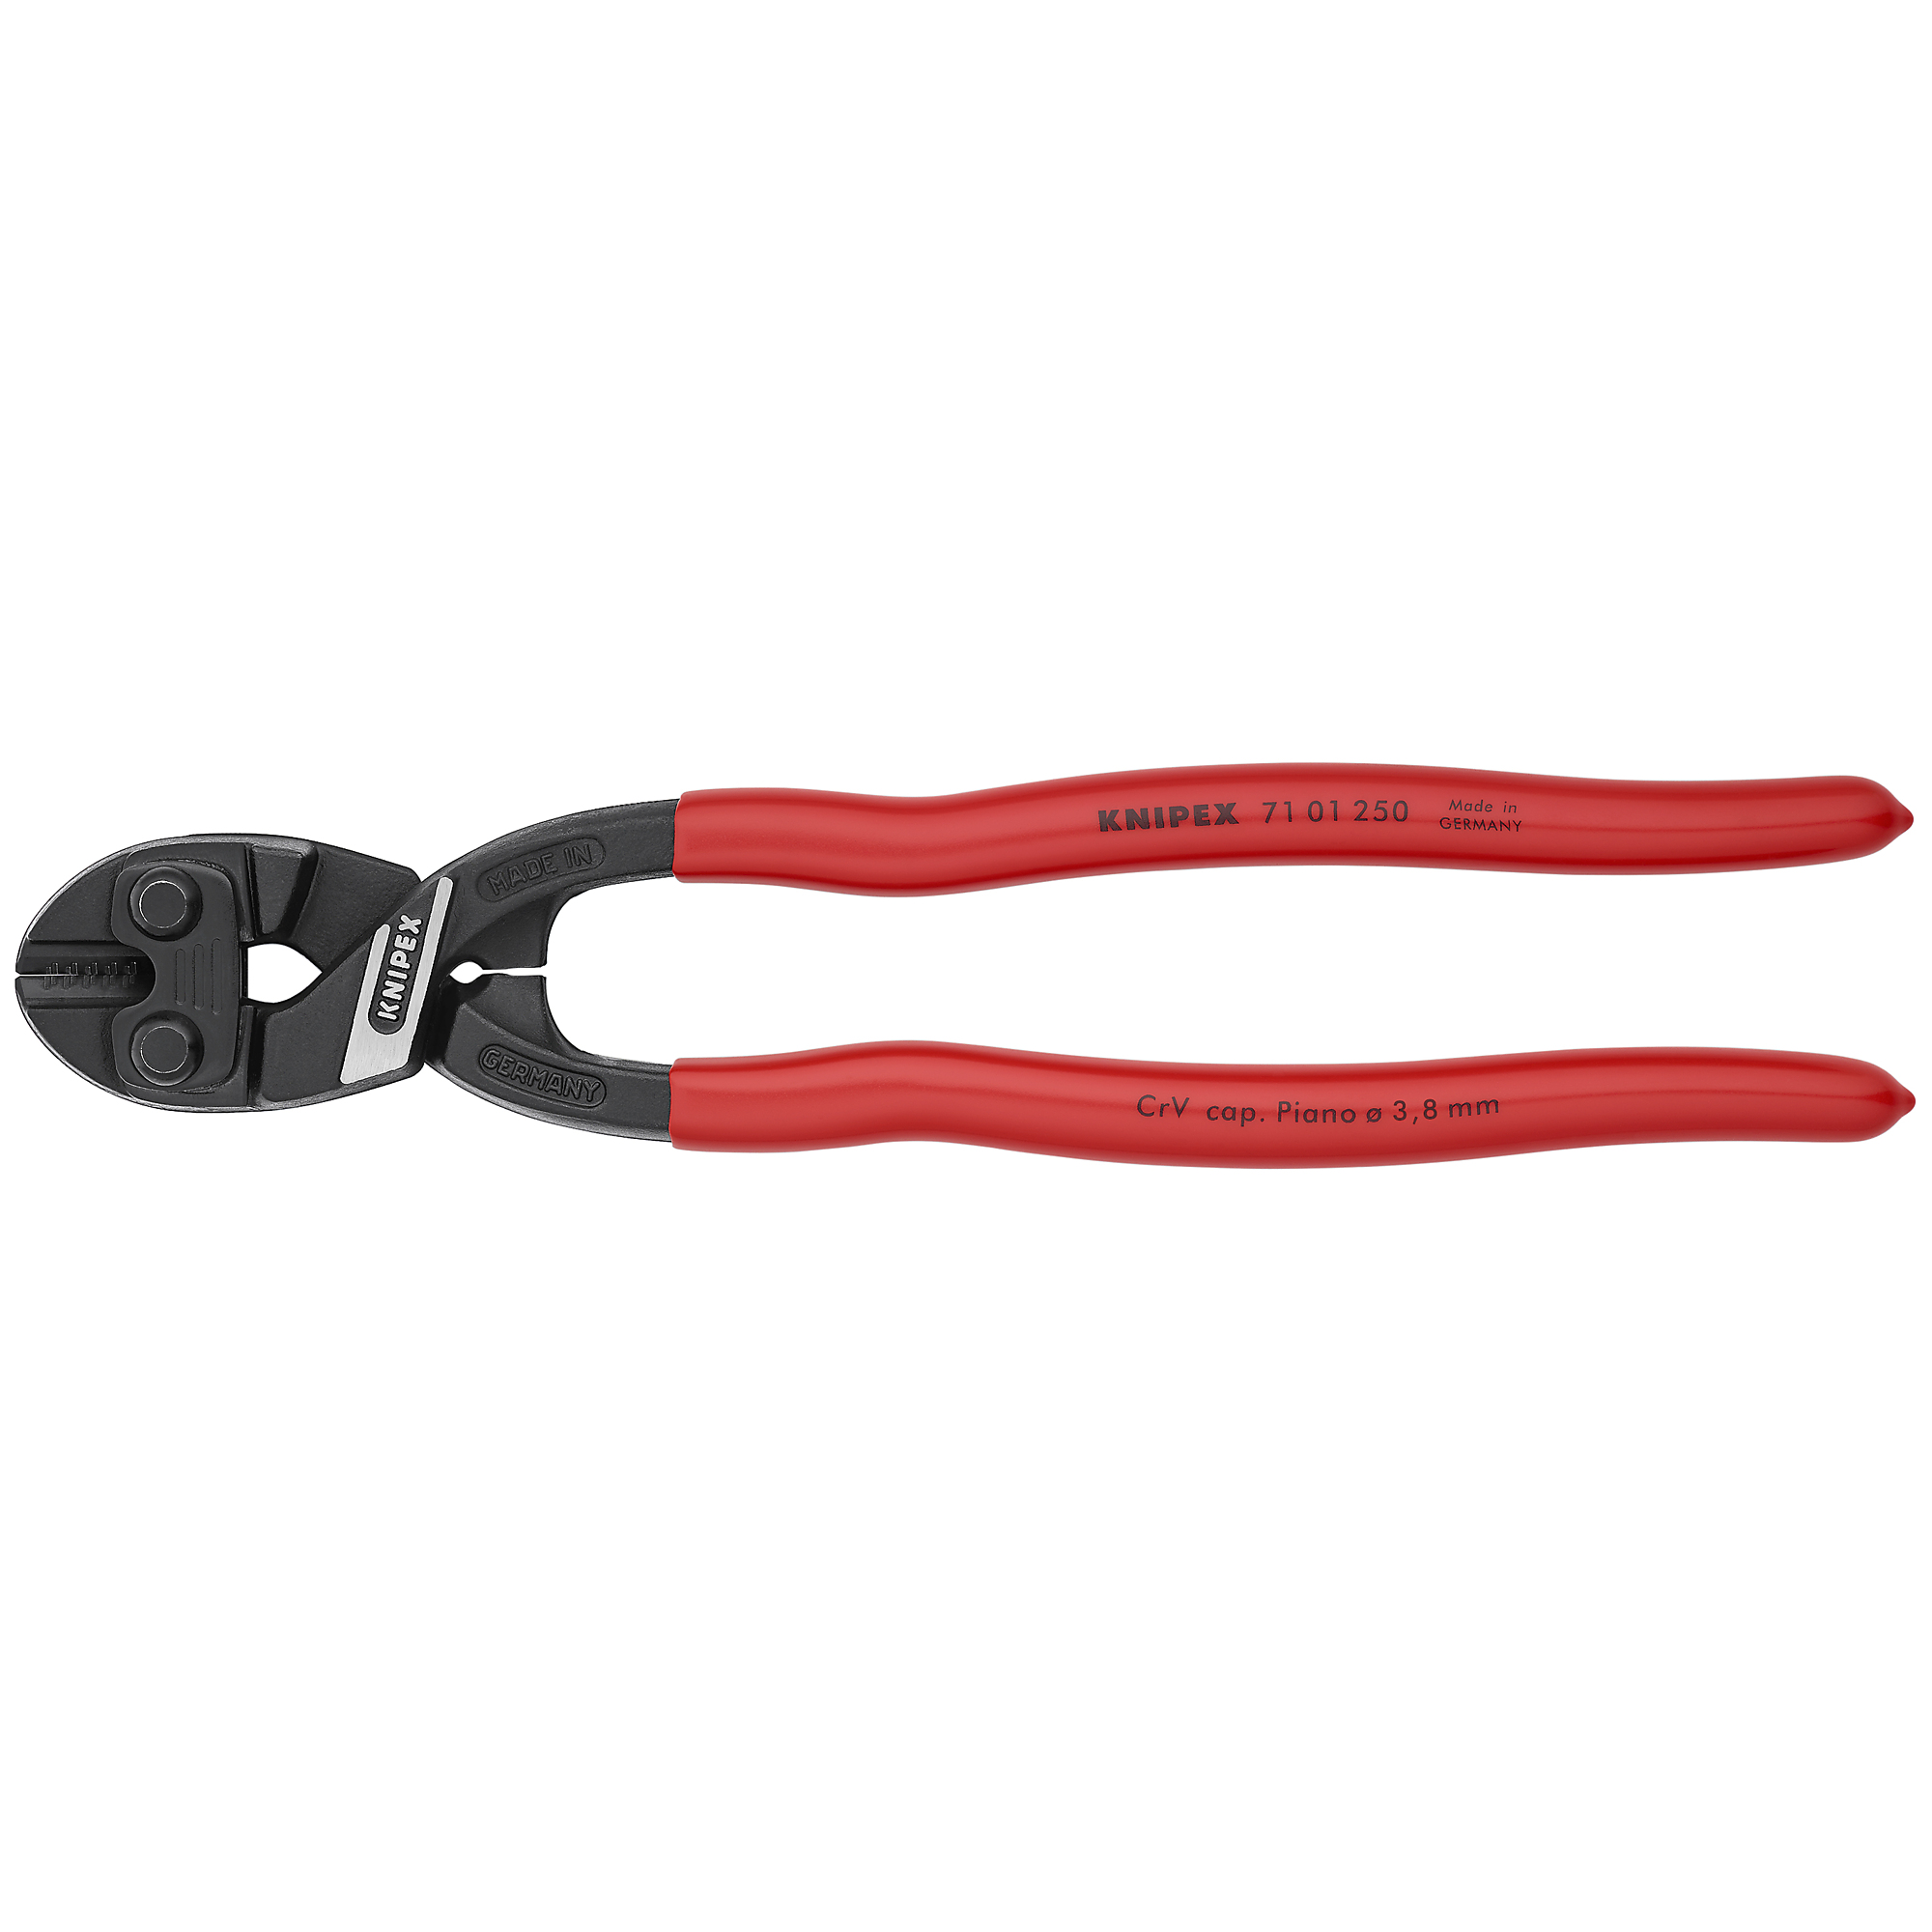 KNIPEX, CoBolt HL XL Bolt Cutters, Plastic coating, 10Inch, Tool Length 10 in, Jaw Opening 0.38 in, Cutting Capacity 0.22 in, Model 71 01 250 SBA